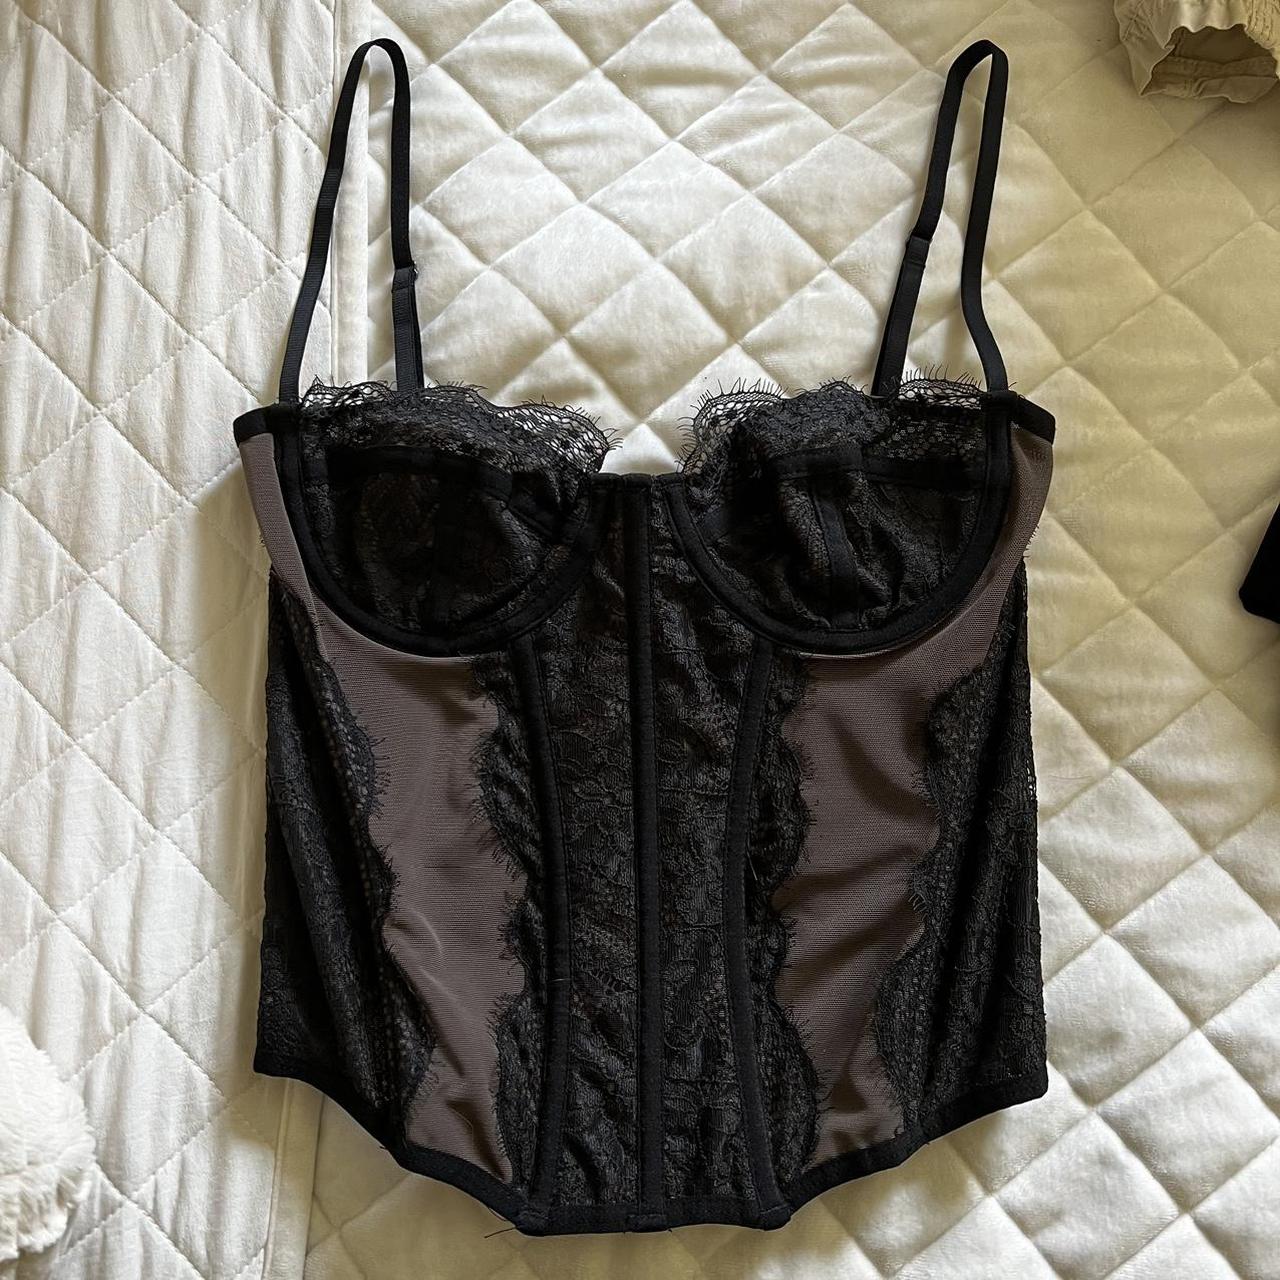 Urban Outfitters Women's Black and Brown Corset | Depop